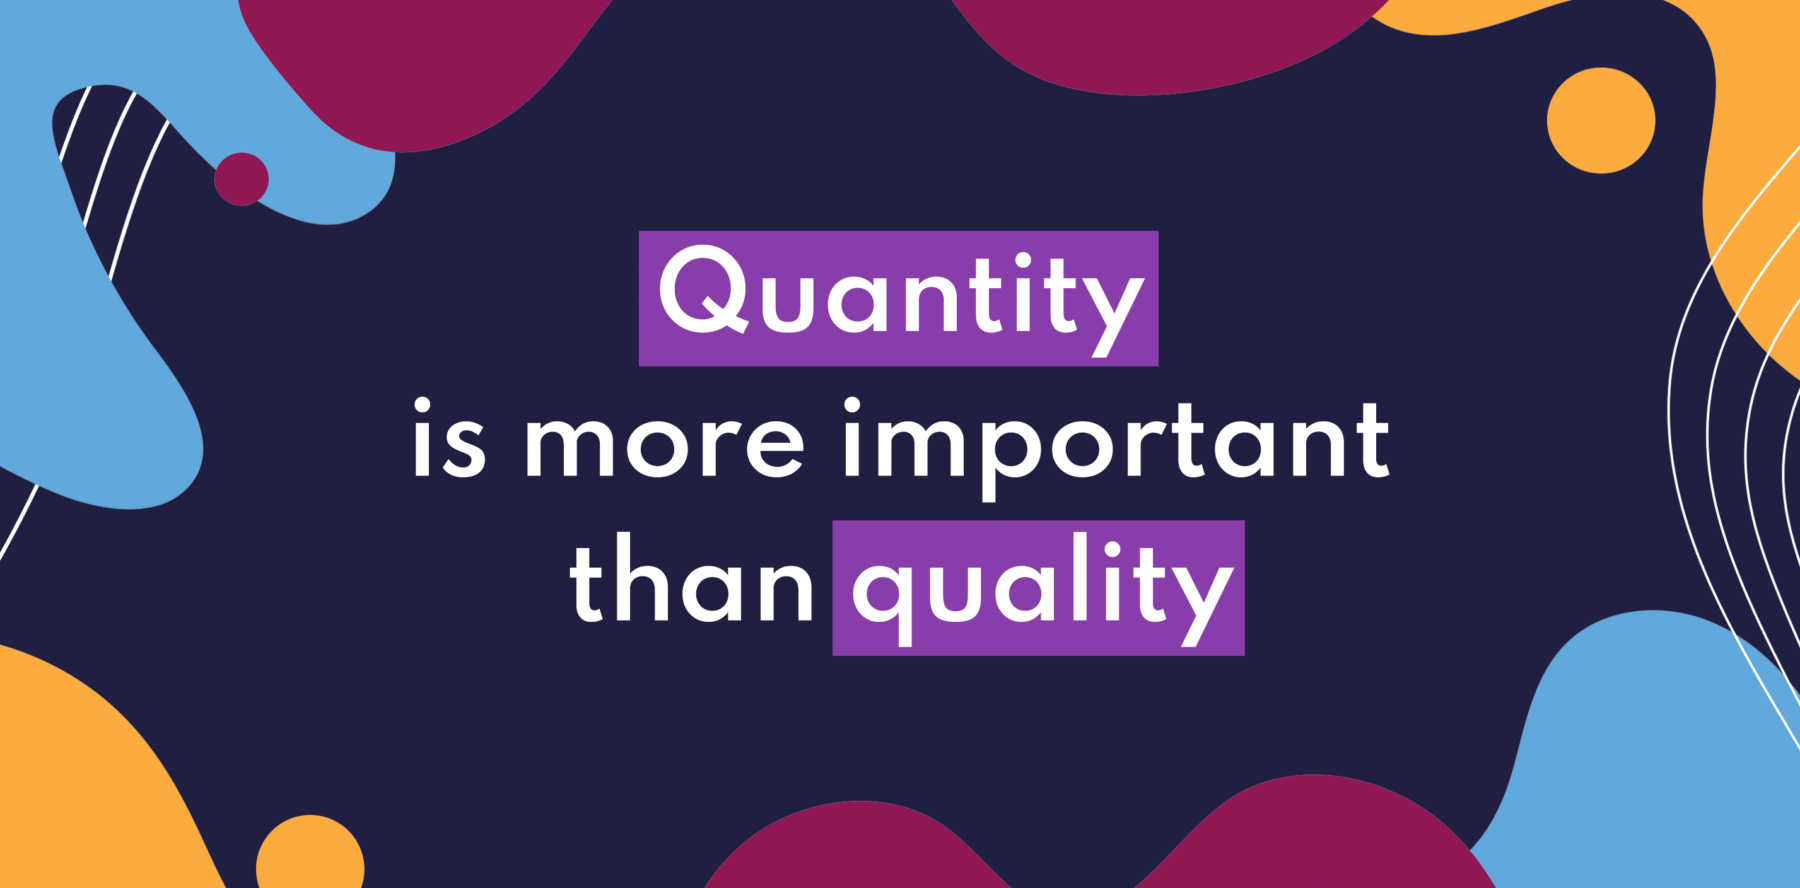 Quantity is more important than quality